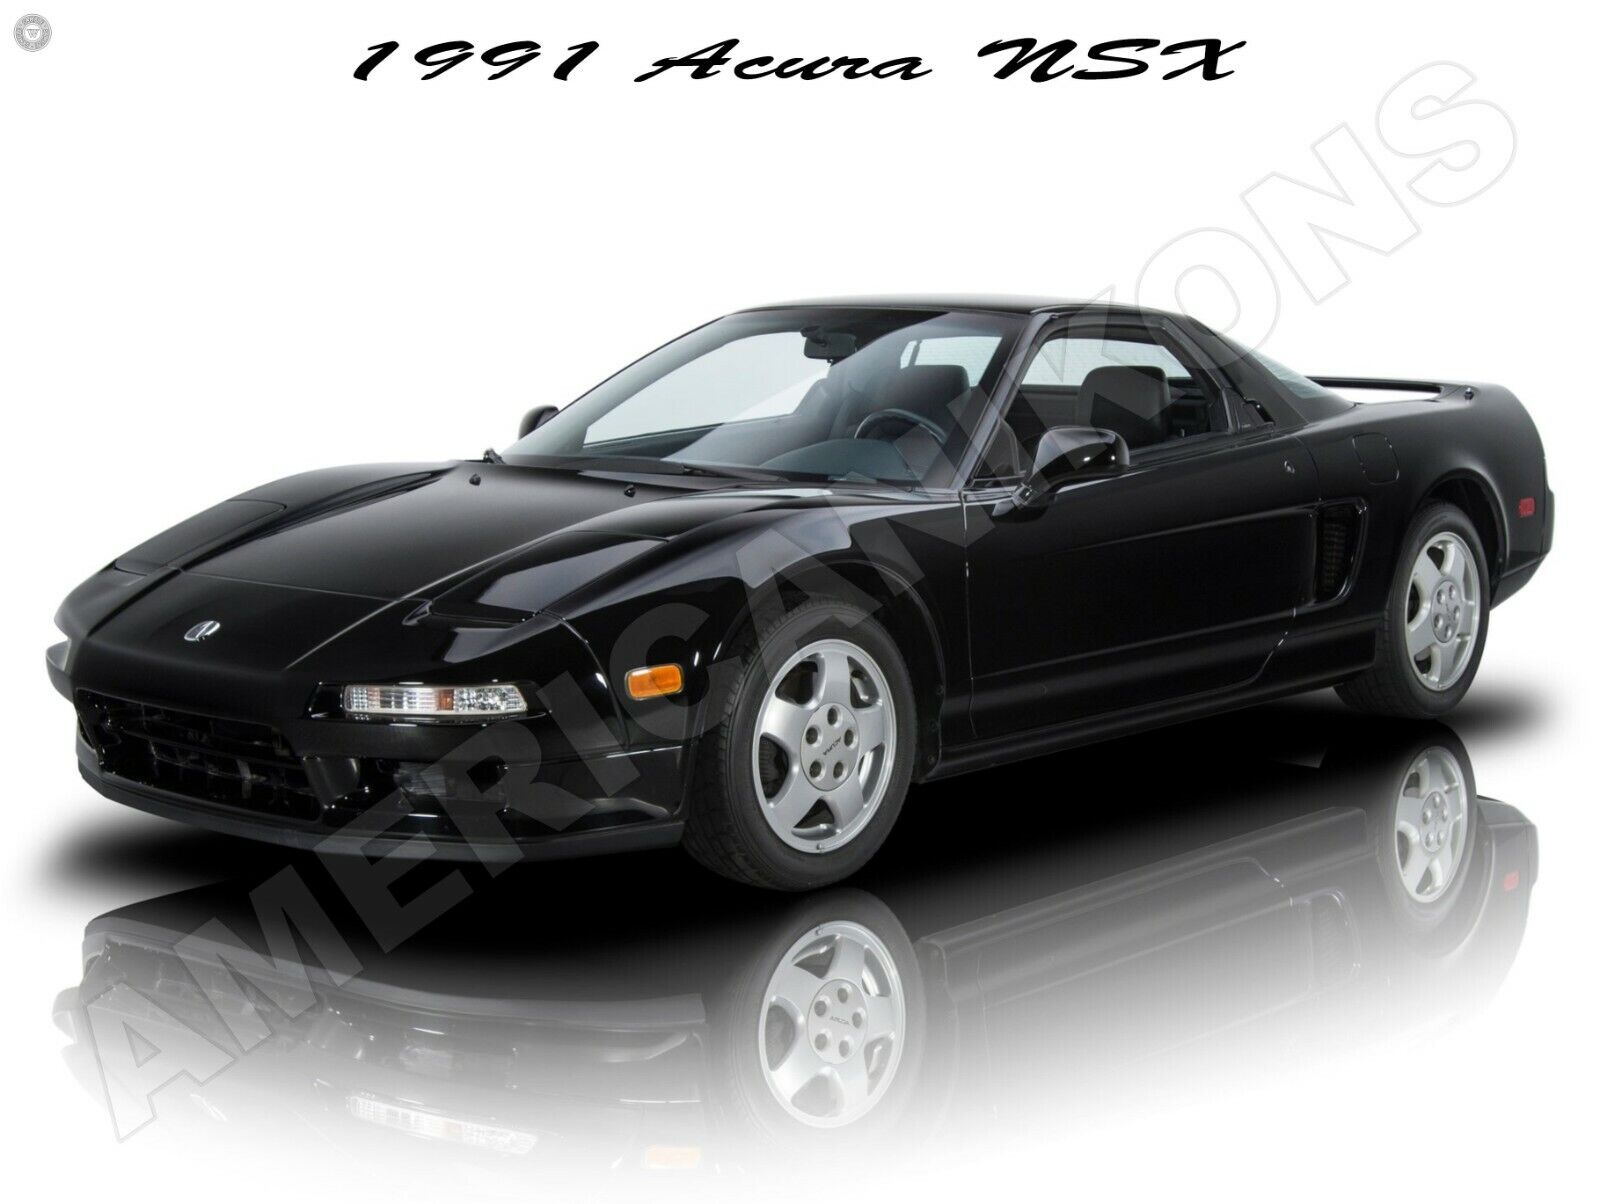 1991 Acura Nsx In Black New Metal Sign: Fully Restored